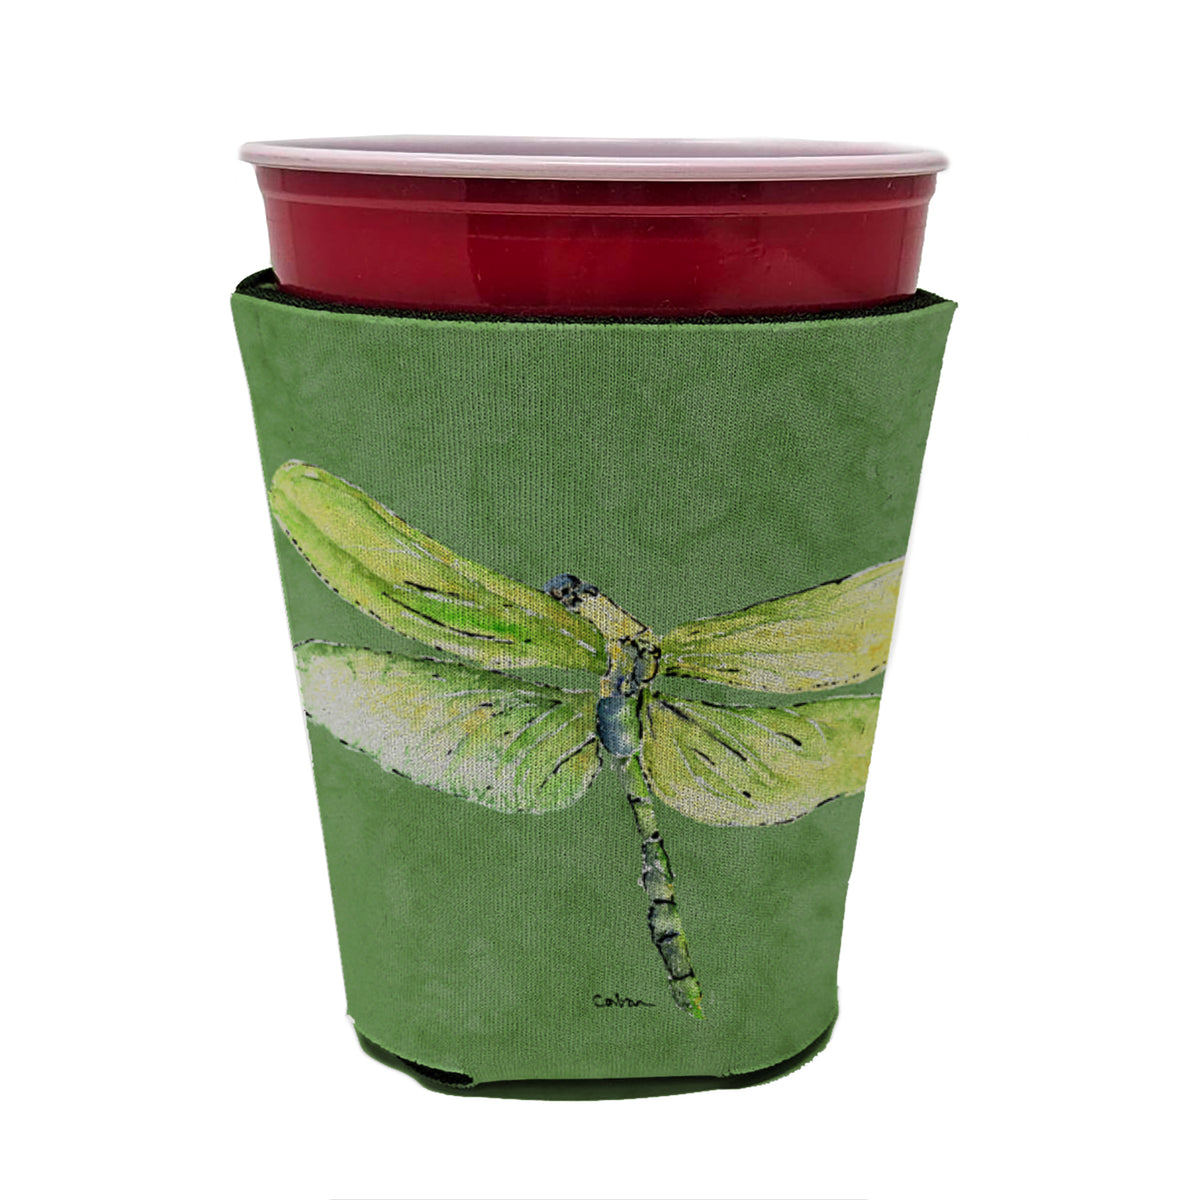 Dragonfly on Avacado Red Cup Beverage Insulator Hugger